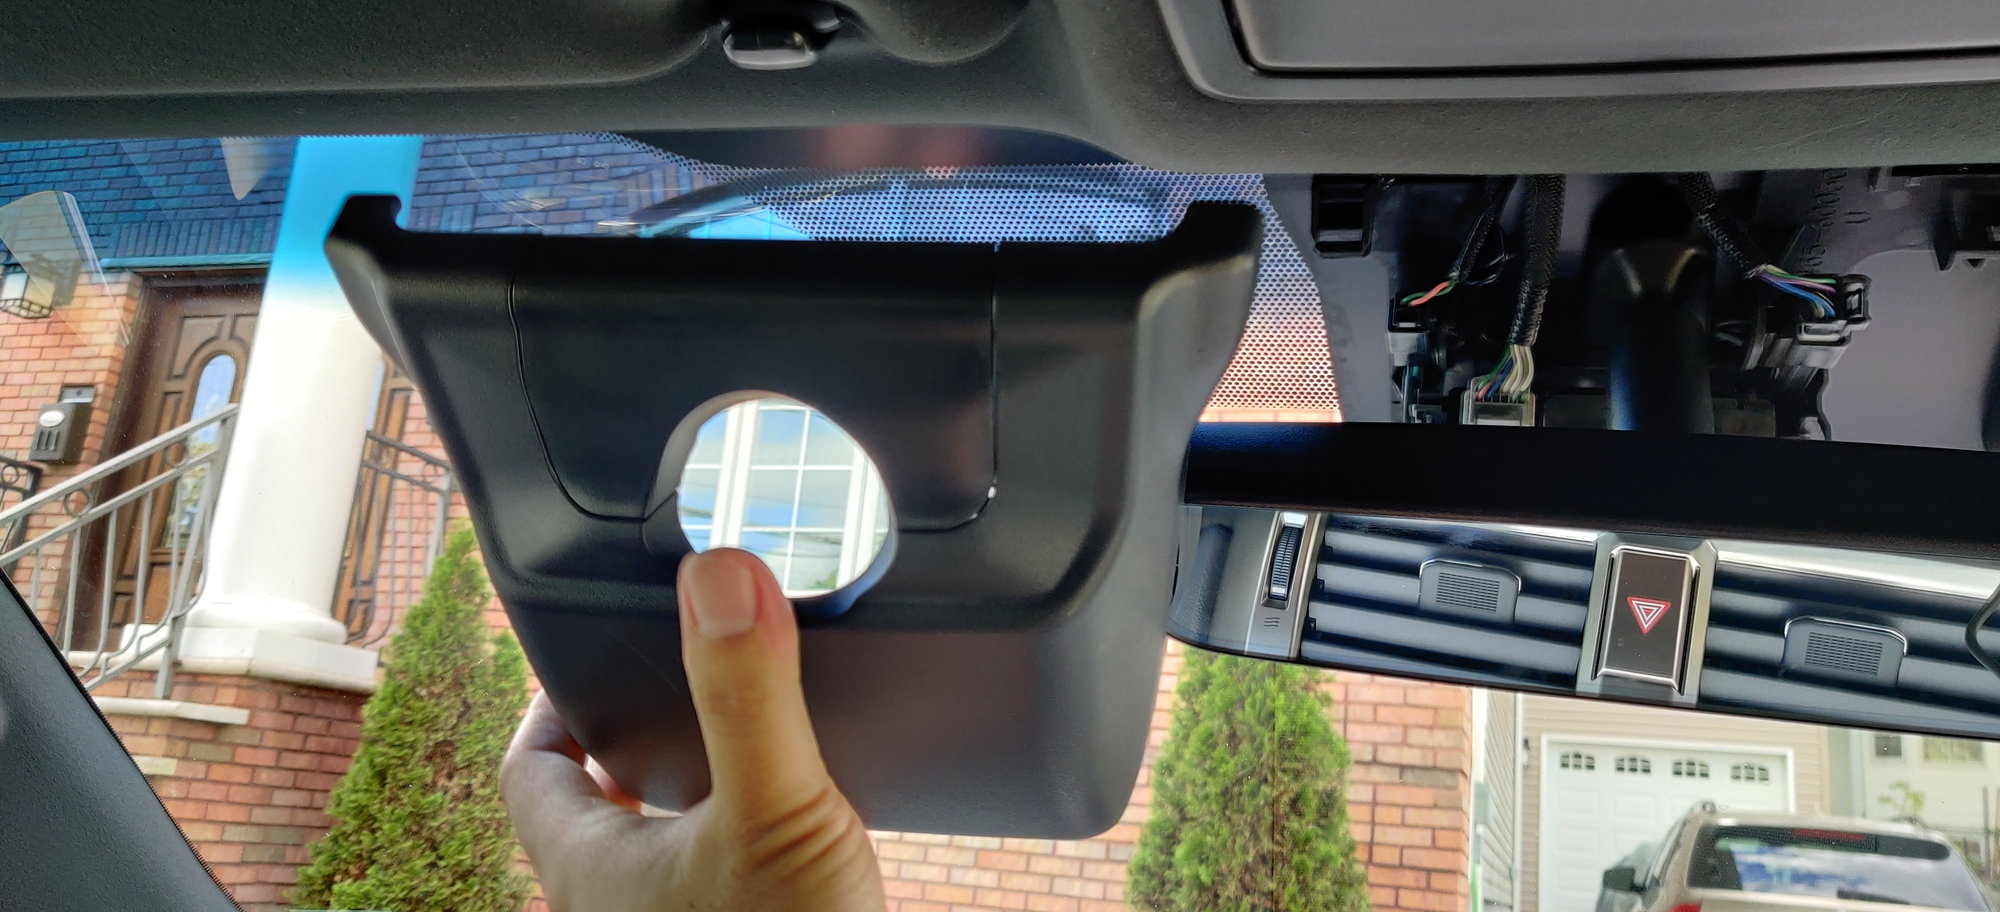 2020+ Rear view mirror cover removal for 12v power - ClubLexus - Lexus  Forum Discussion